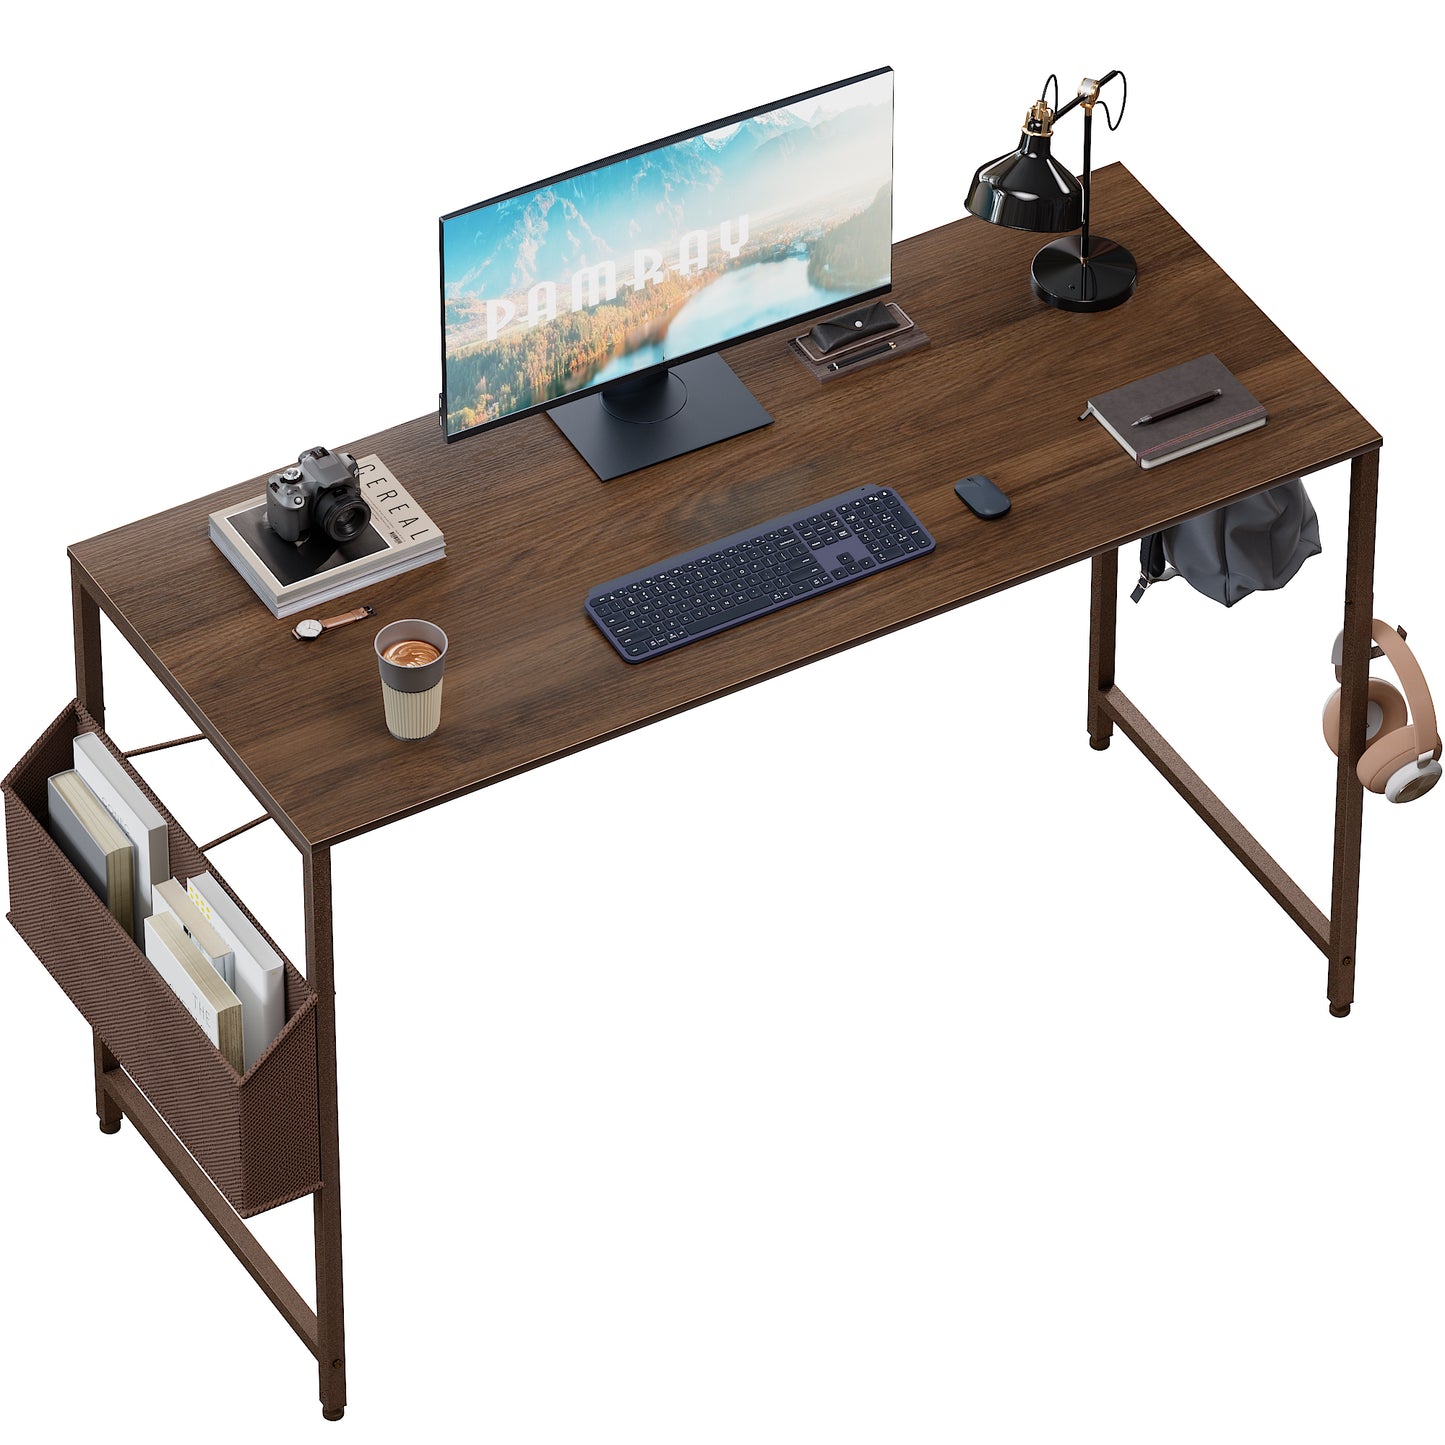 Pamray 47 Inch Computer Desk with Storage Bag, Home Office Work Desk with Headphone Hook, Study Writing Table